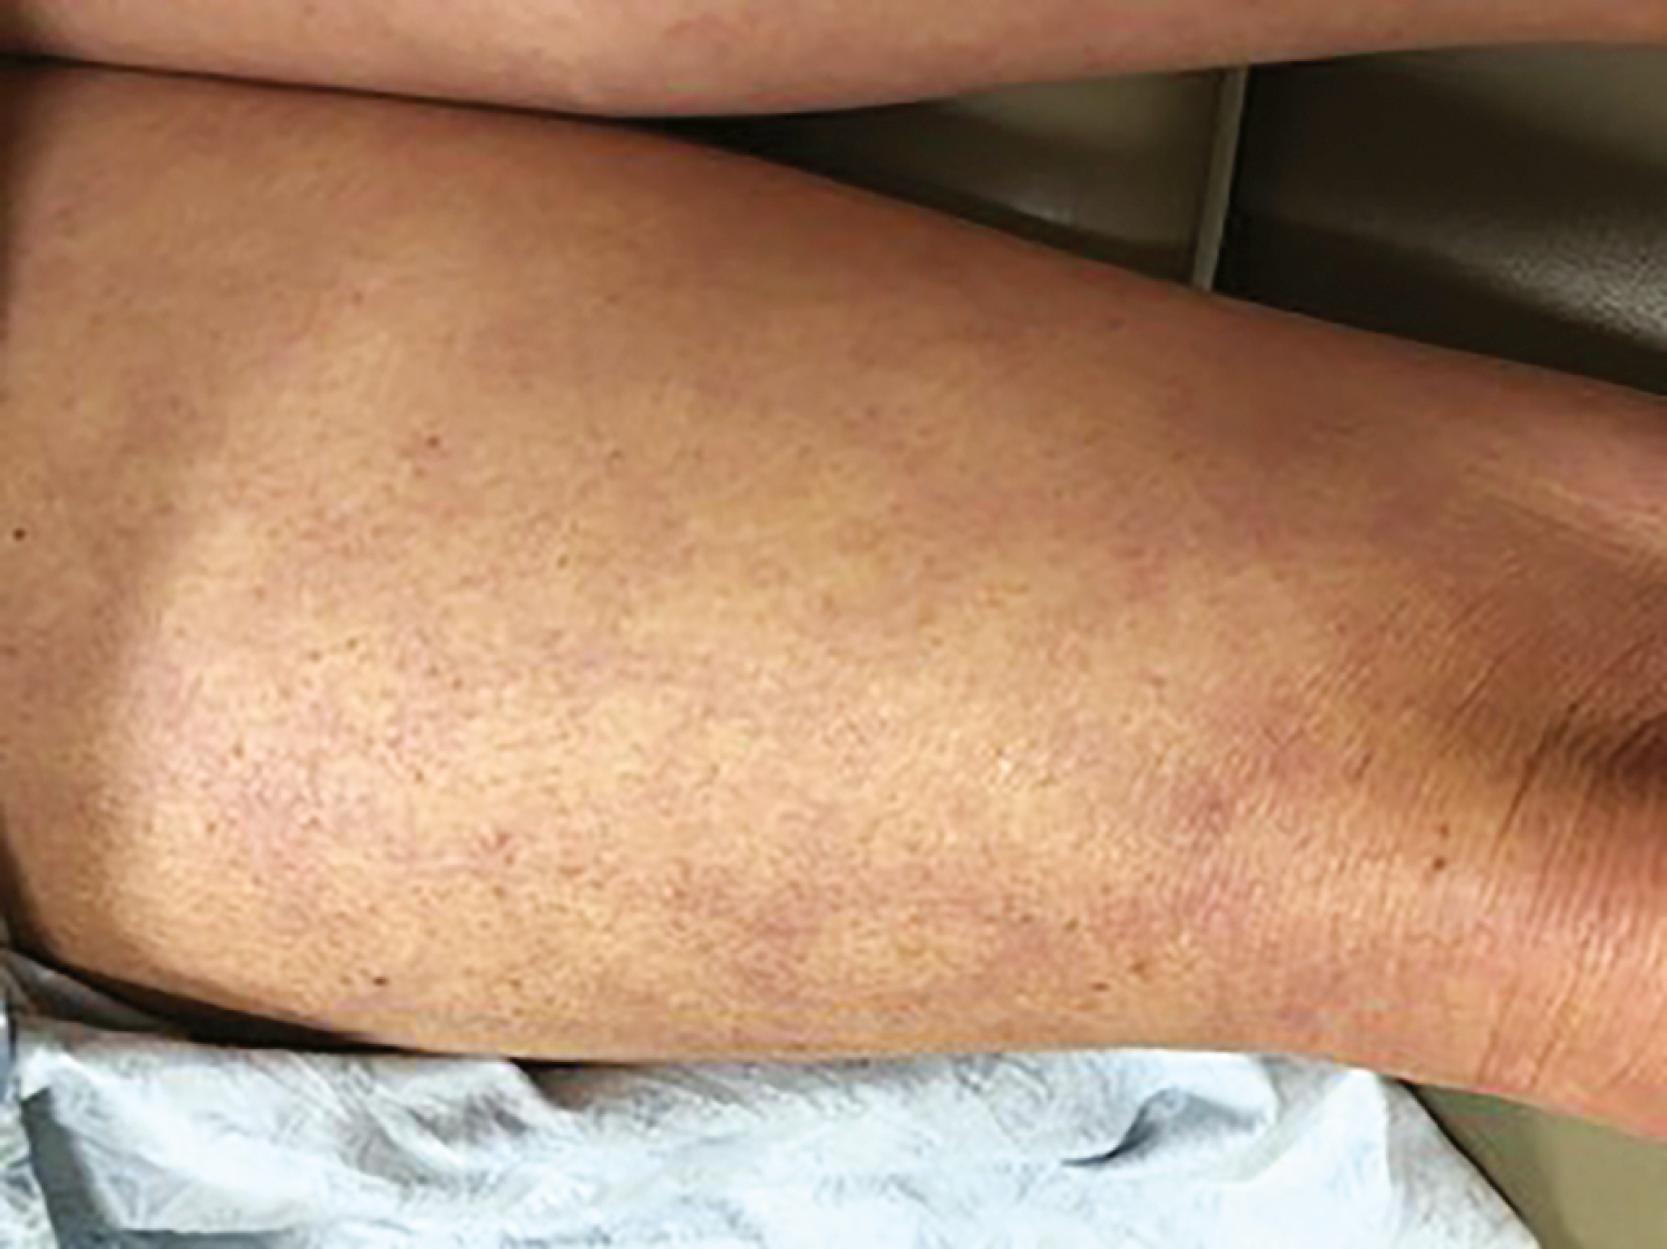 FIGURE 13.1, Appearance of livedo reticularis suggesting decreased skin perfusion.